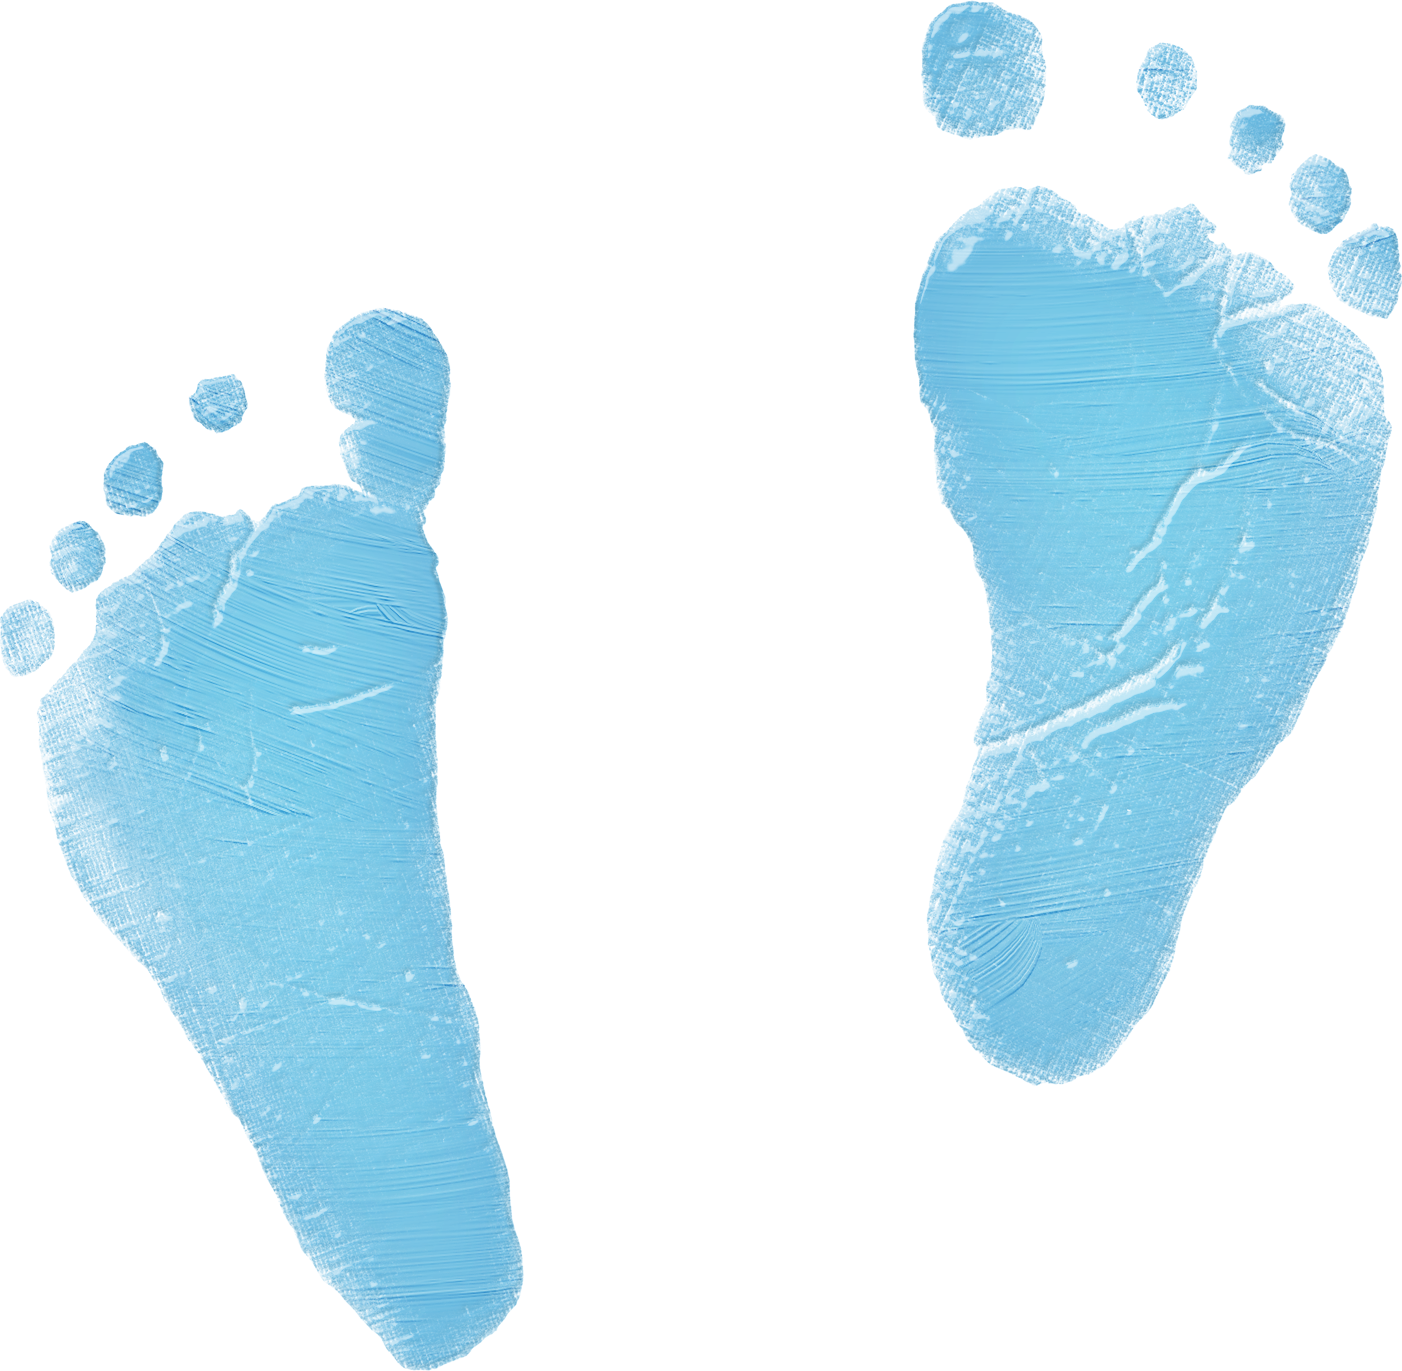 Blue Baby Foot Print Clipart Best